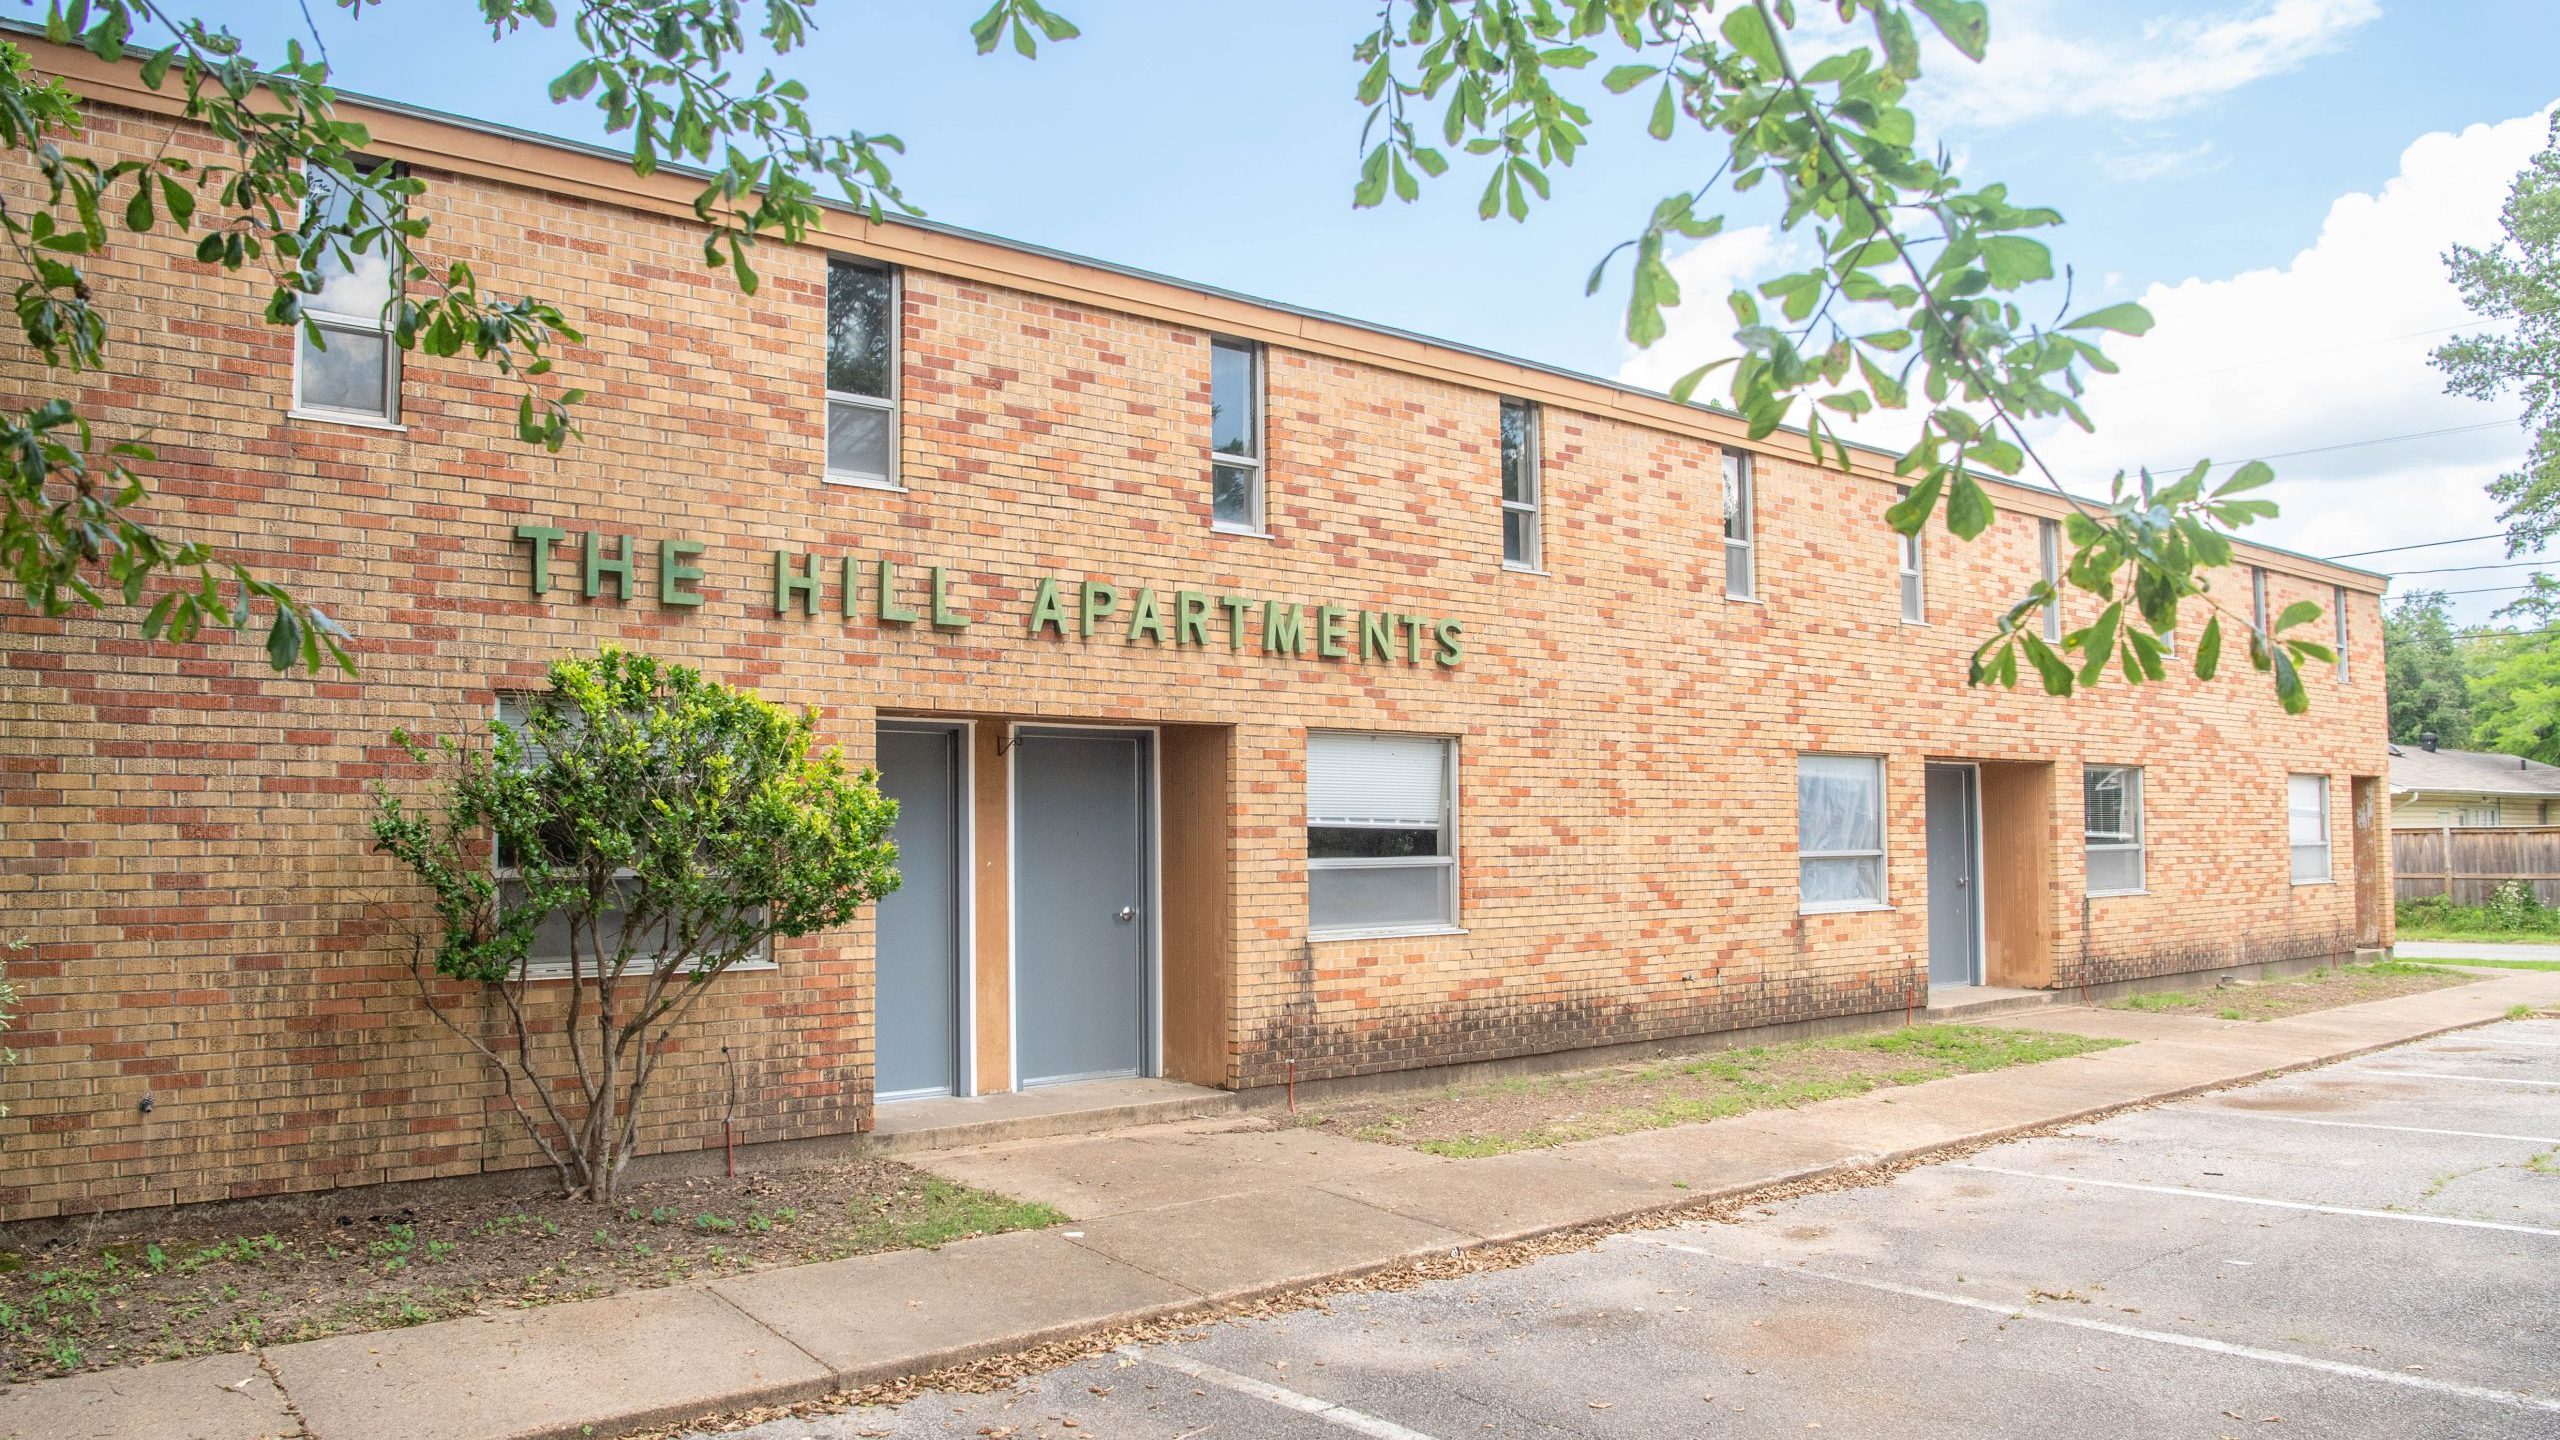 Exterior view of Hill Apartments residence hall.